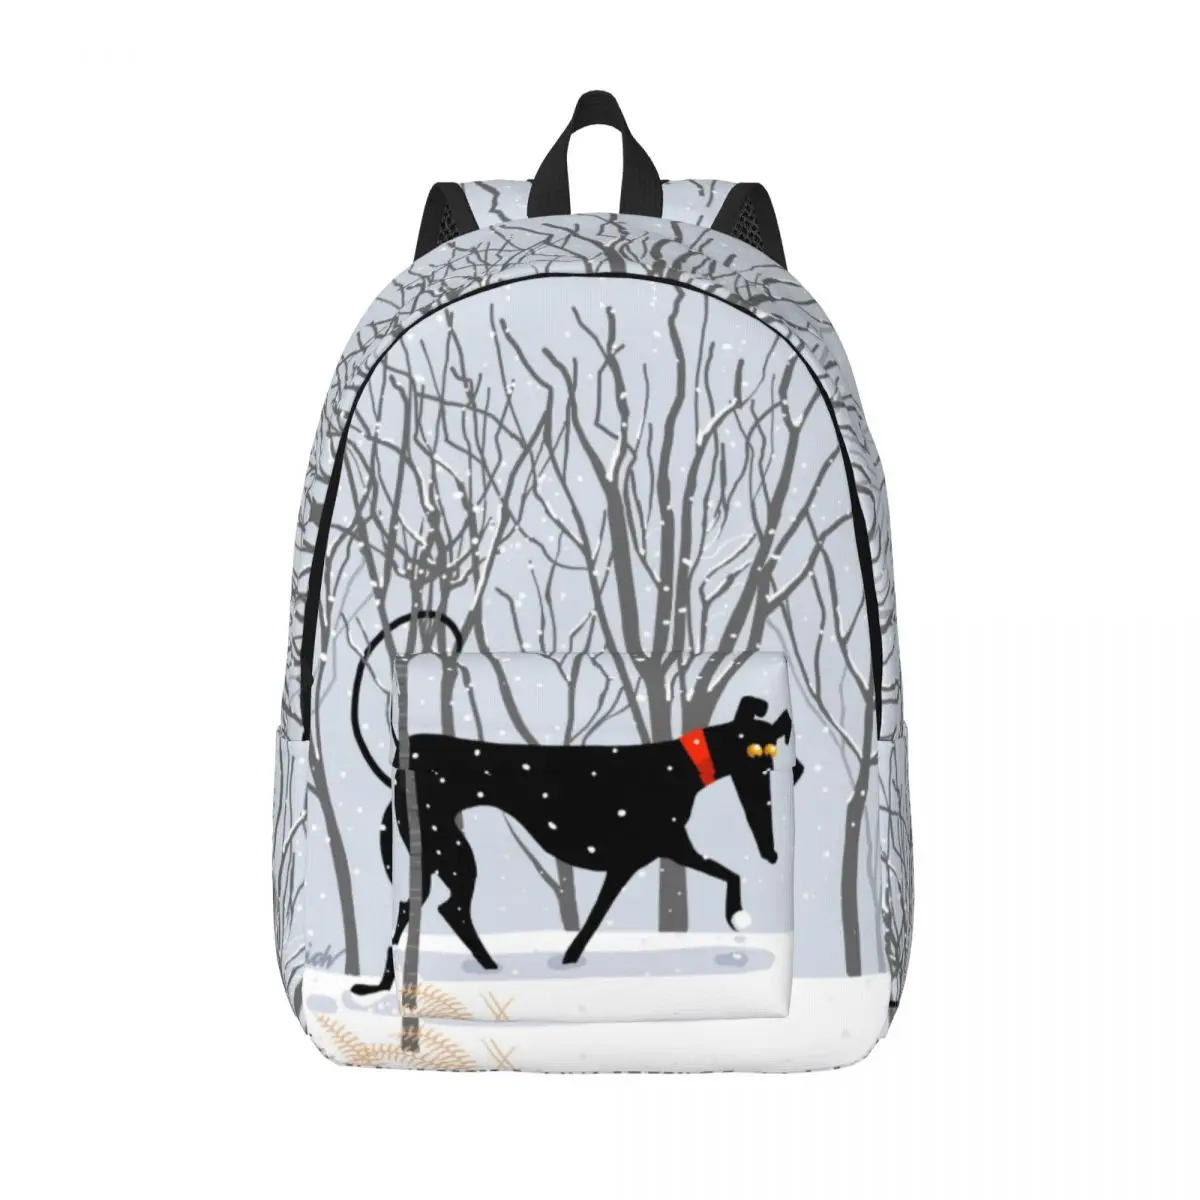 

Winter Hound Travel Canvas Backpack School Computer Bookbag Greyhound Whippet Sighthound Dog College Student Daypack Bags